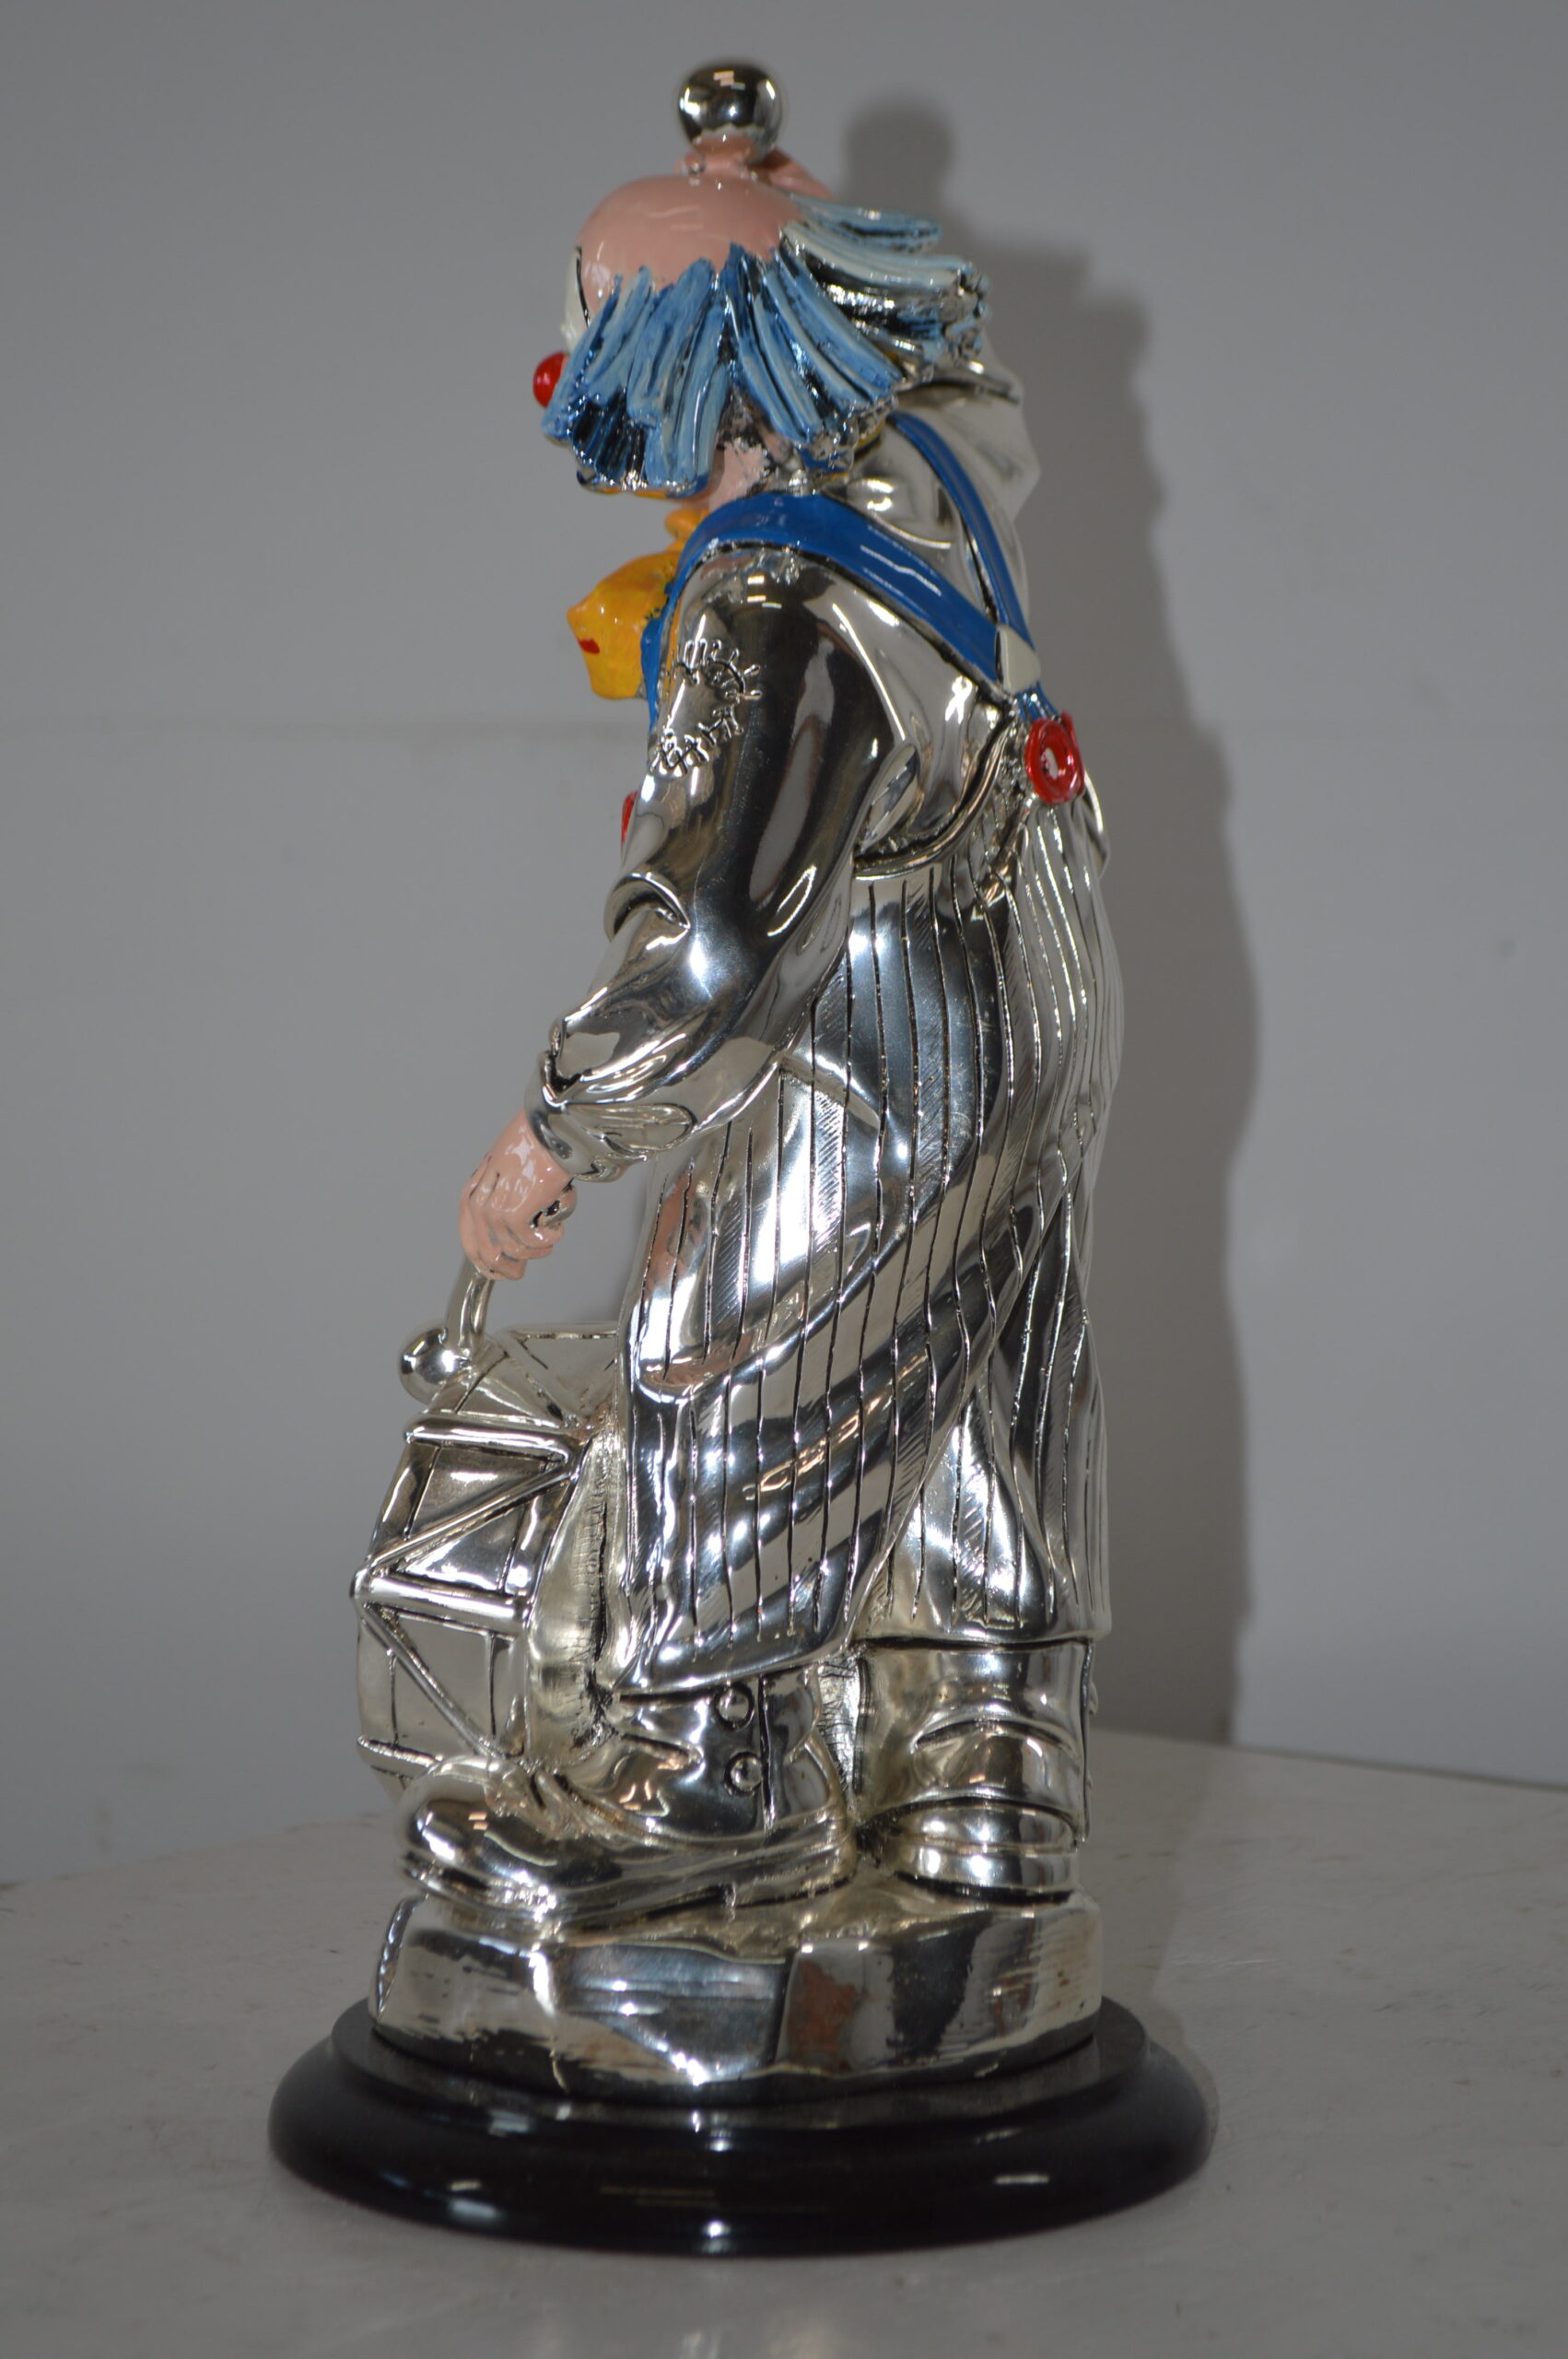 Clown Plays the Drams Resin Statue Silver finish - Size: 6L x 6W x 16H.